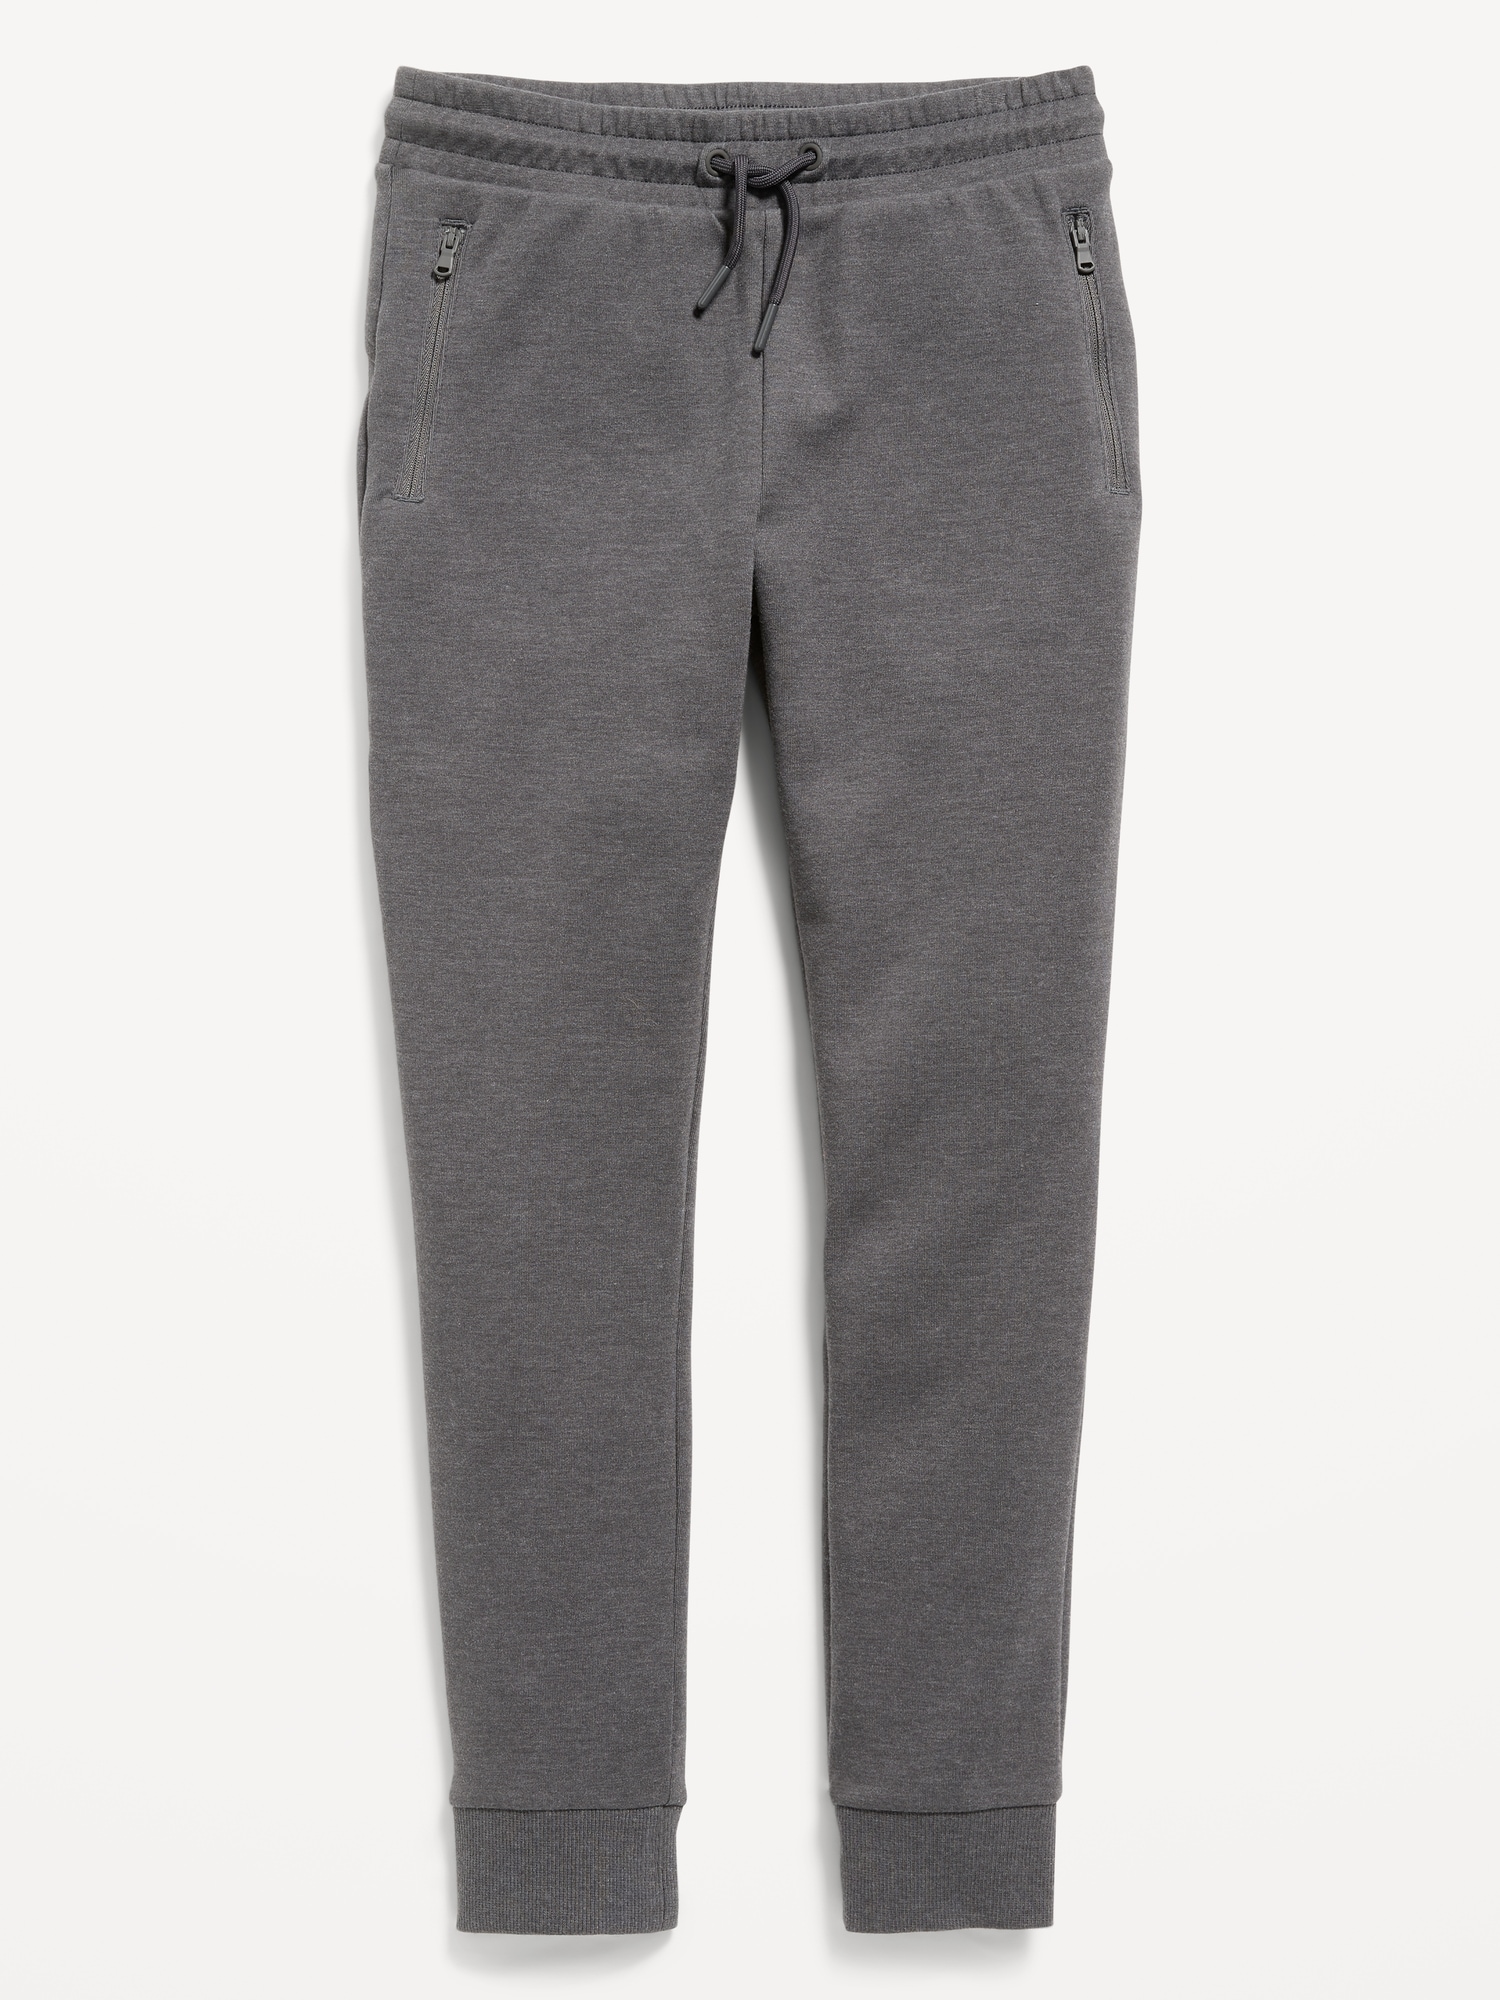 Slim High-Waisted Dynamic Fleece Joggers for Girls | Old Navy